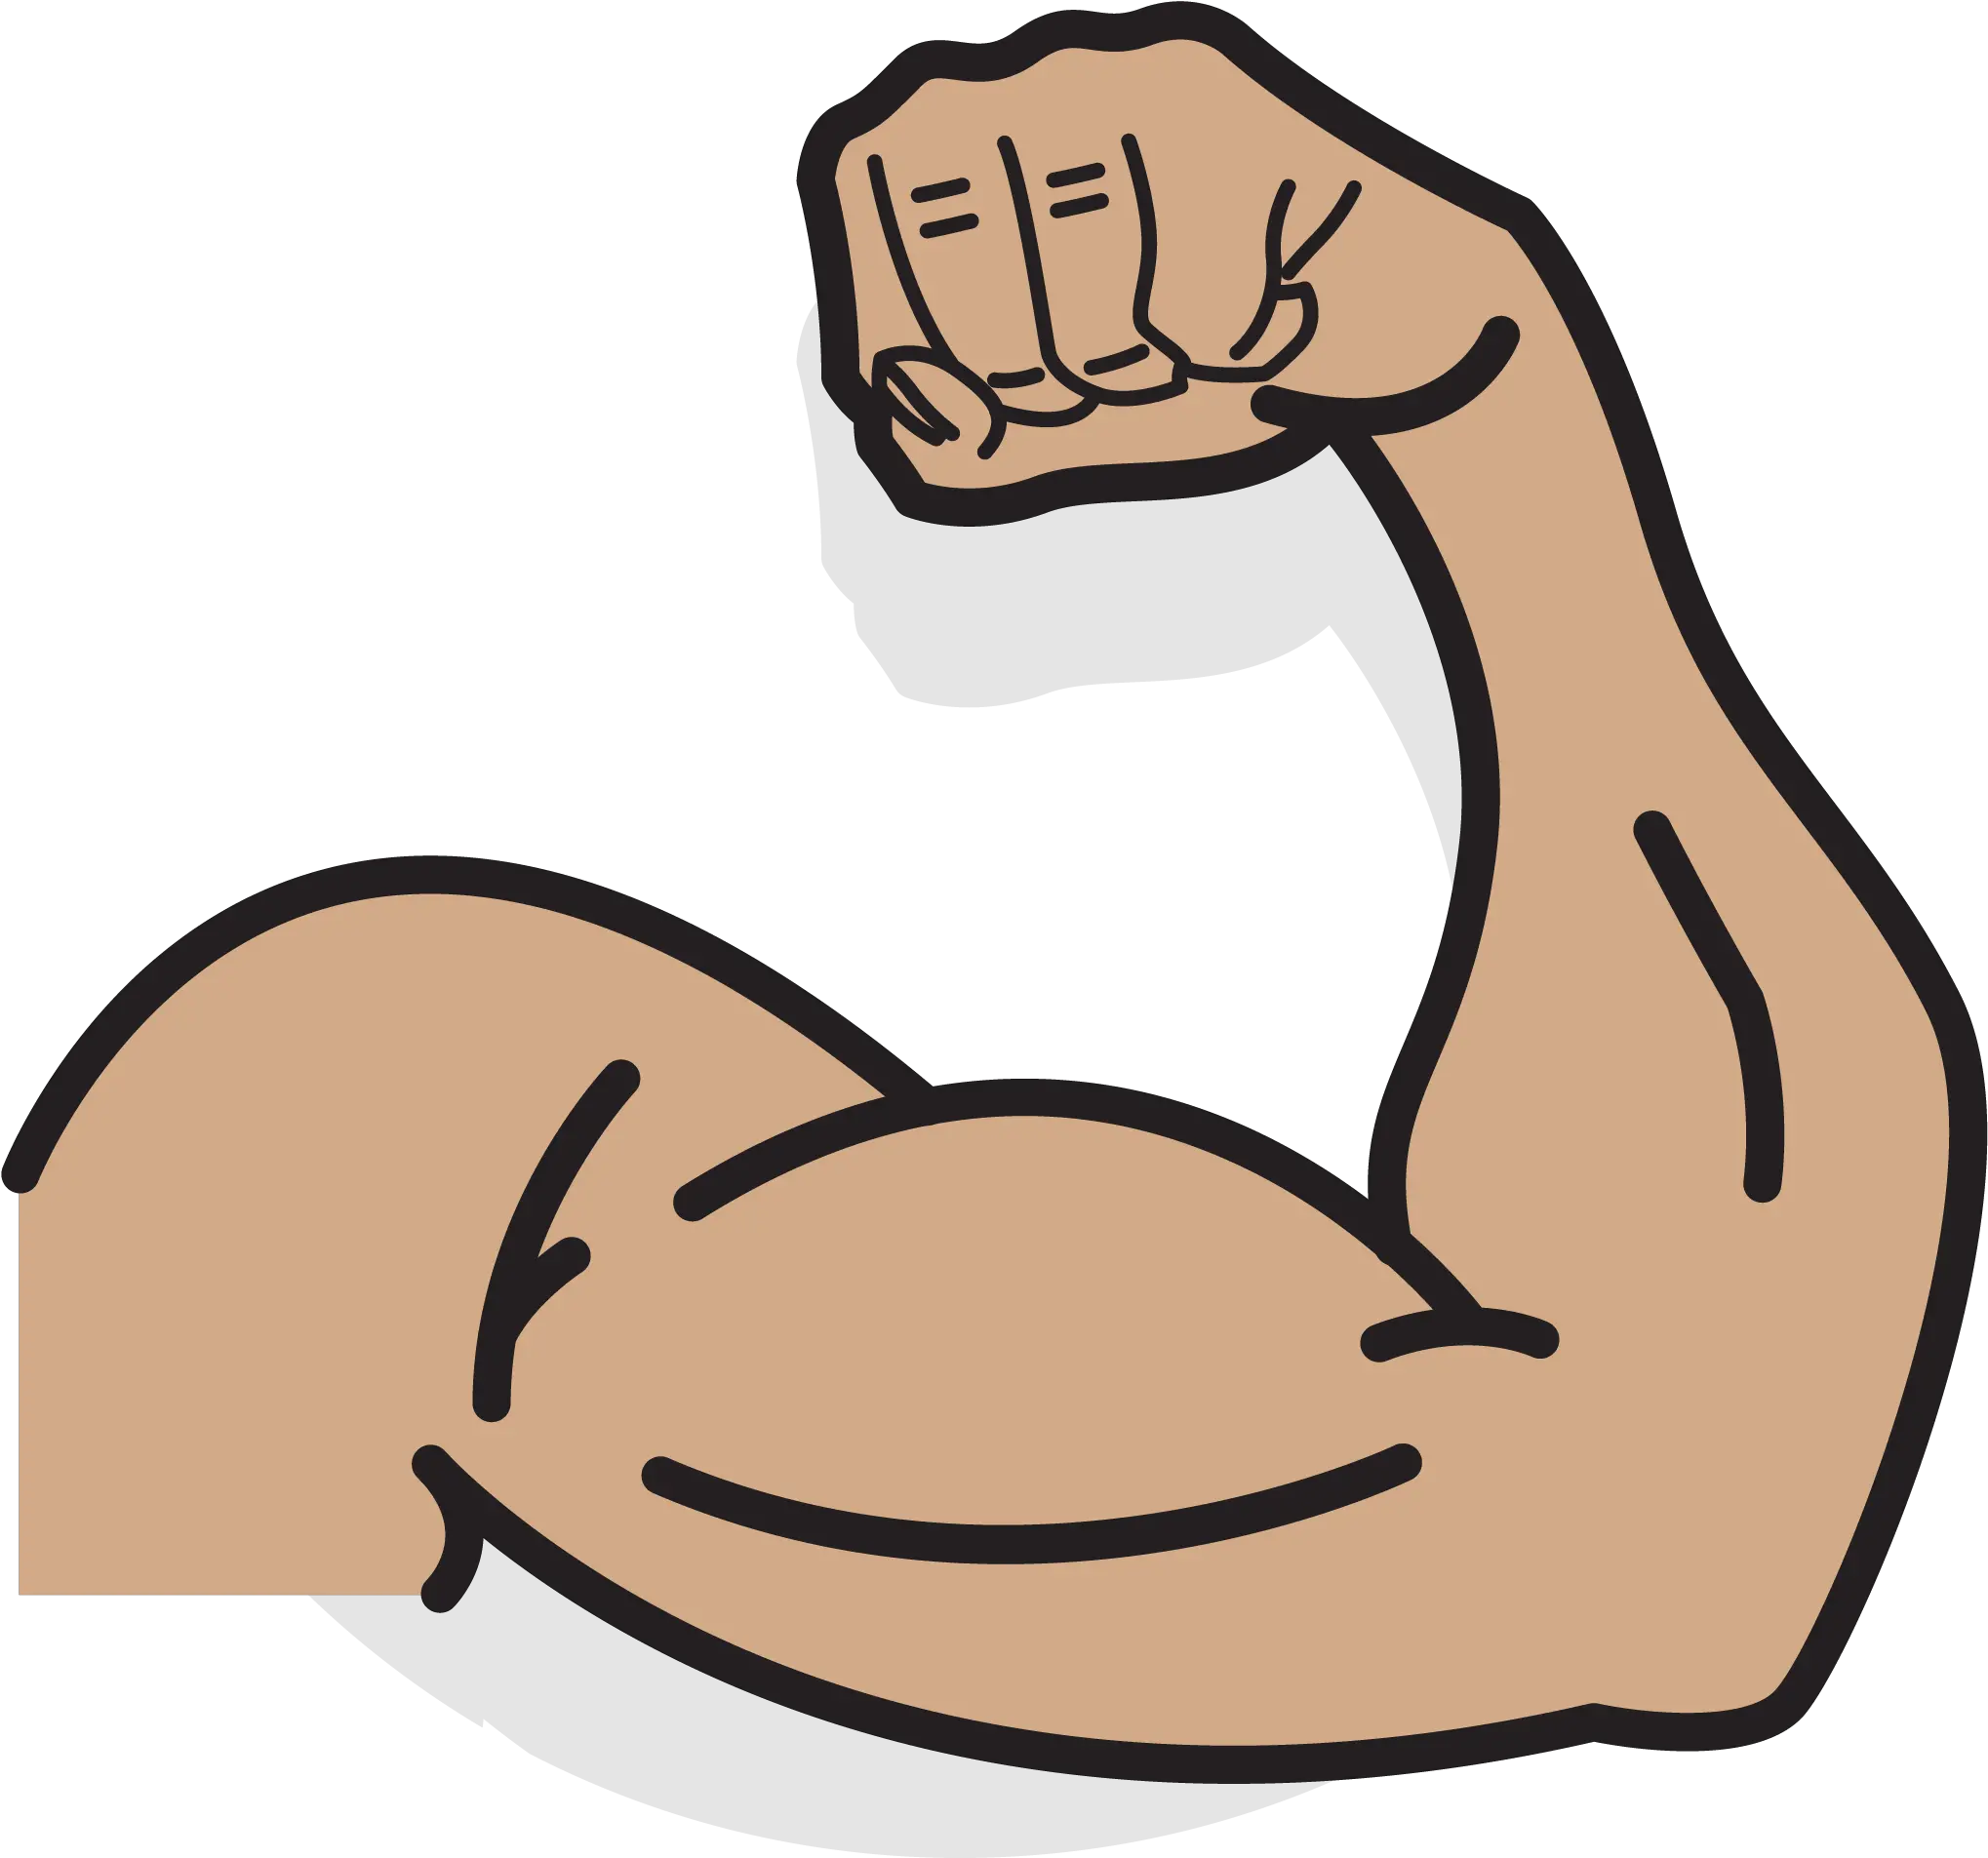 Download Fist Thumb Arm Clip Art The Arm And Fist Cartoon Png Arm Png